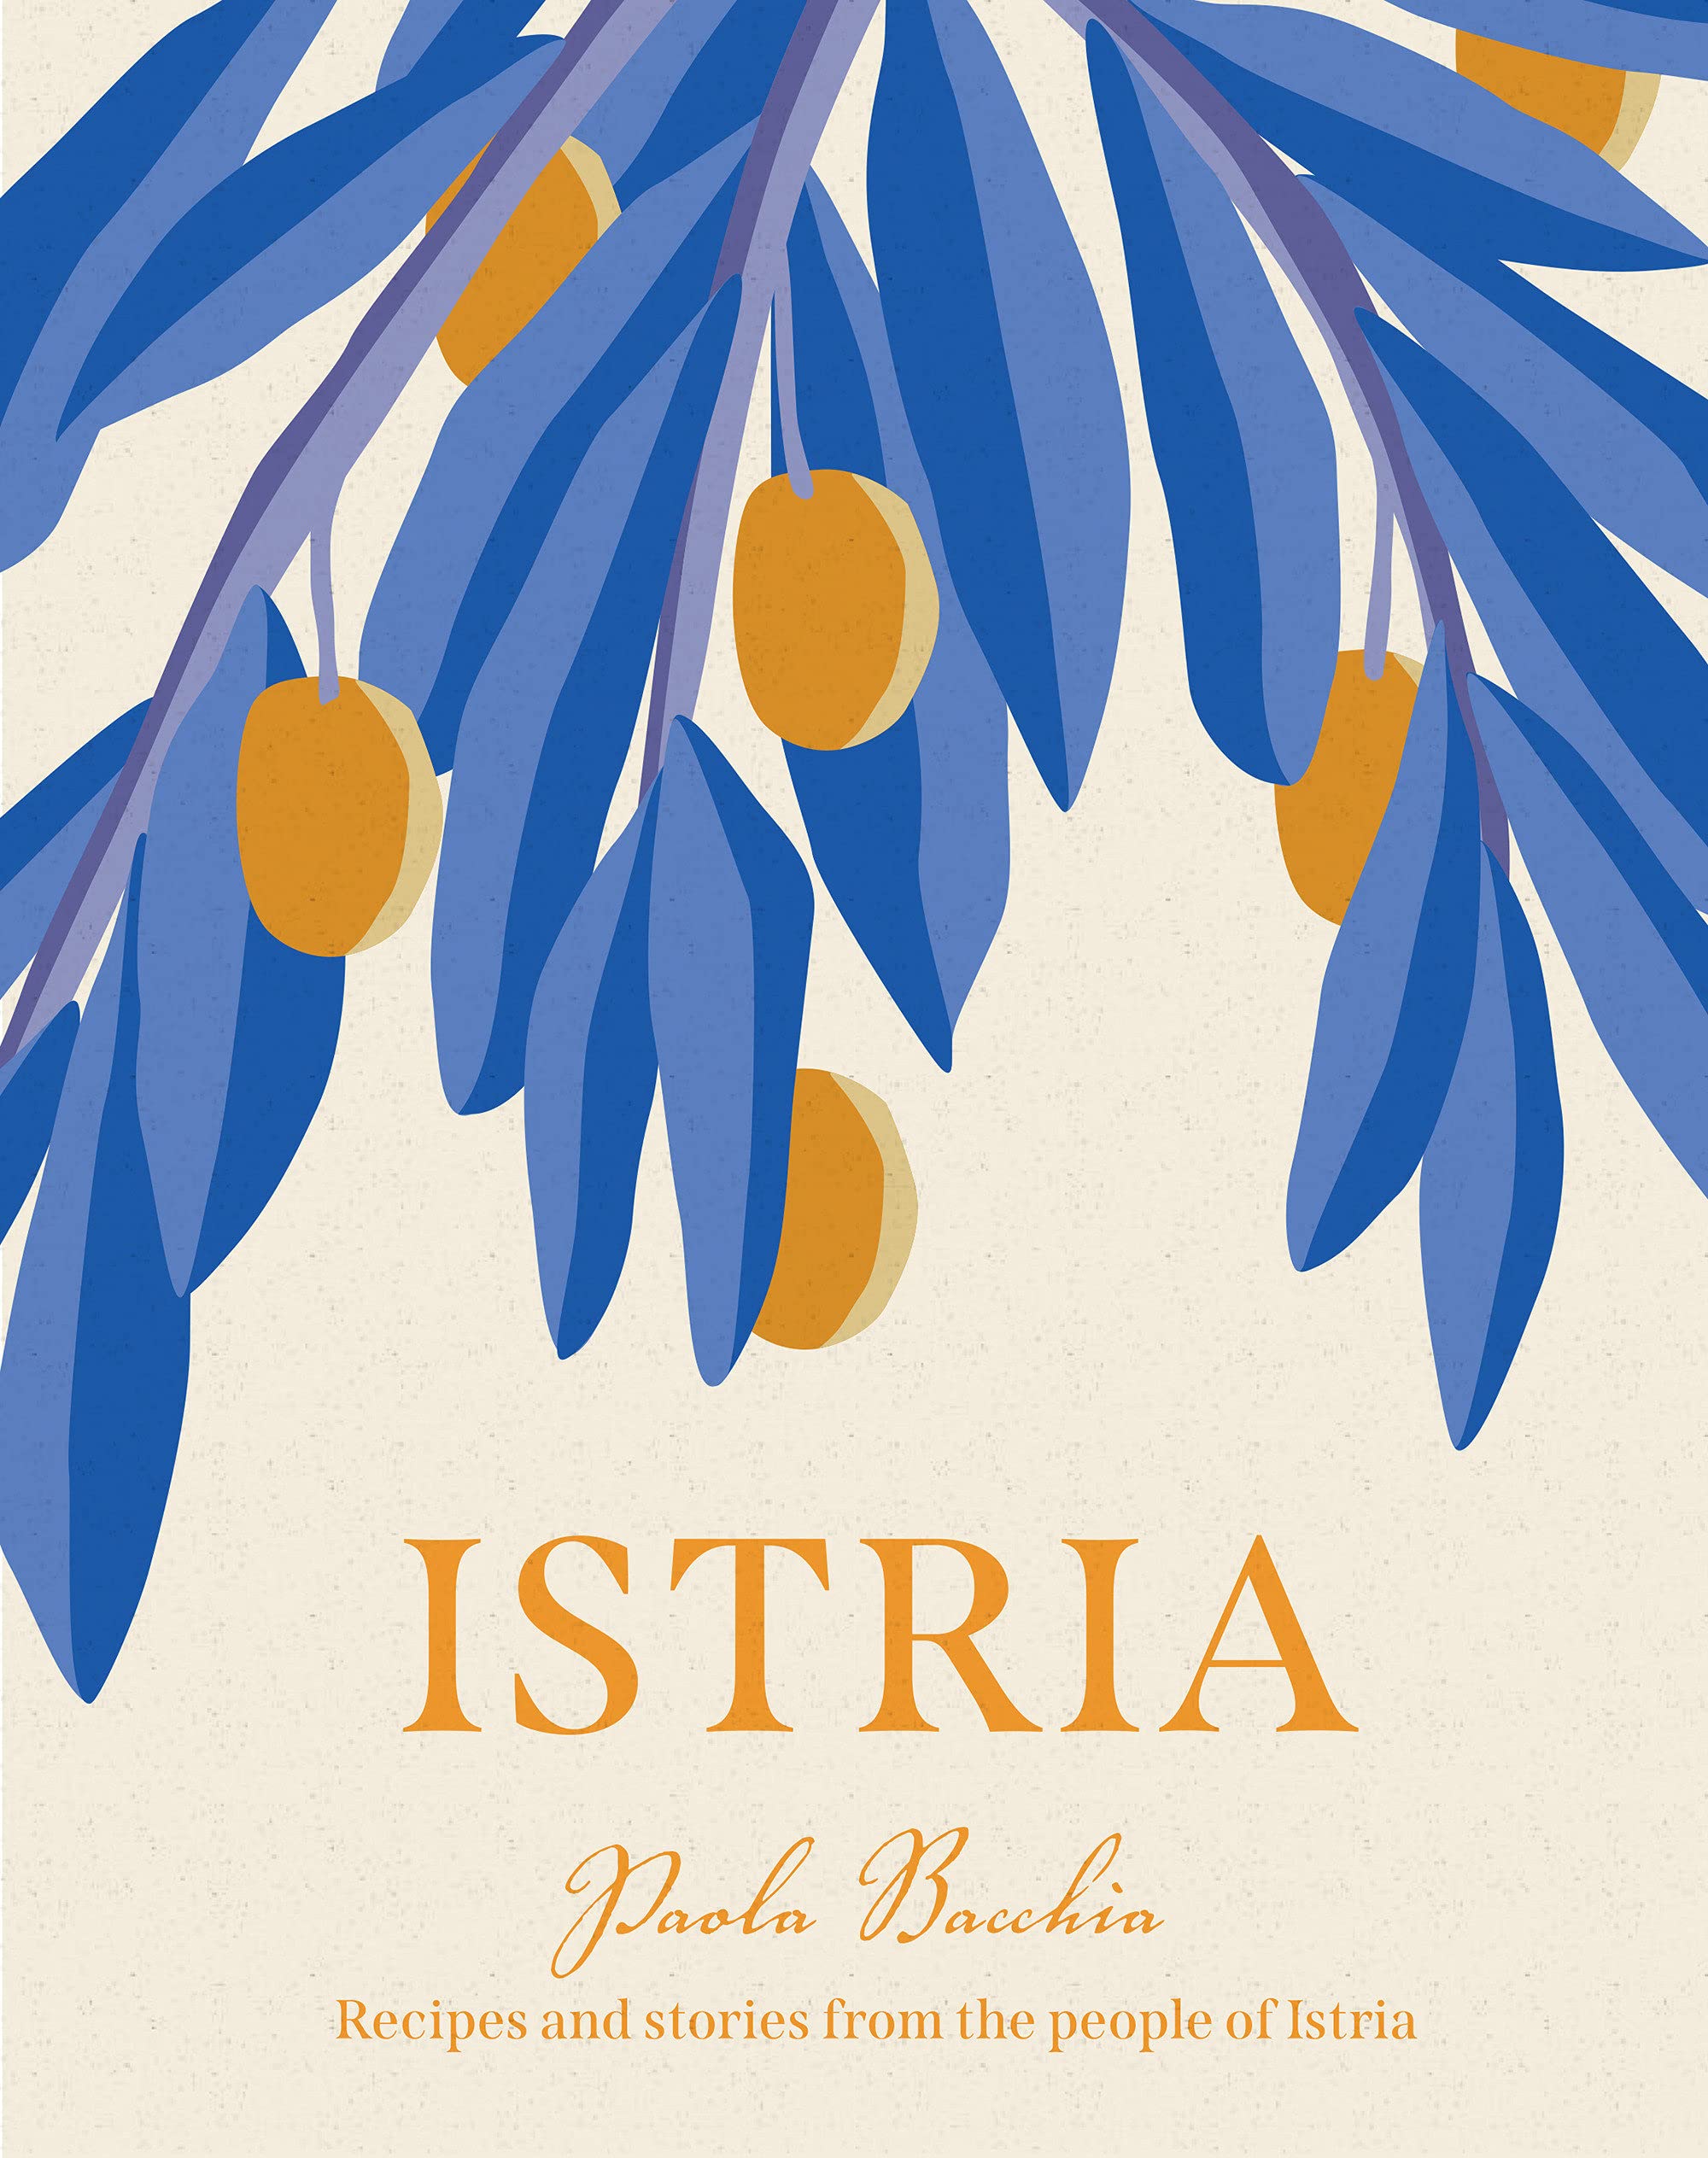 Istria: Recipes and stories from the hidden heart of Italy, Slovenia and Croatia (Paola Bacchia)